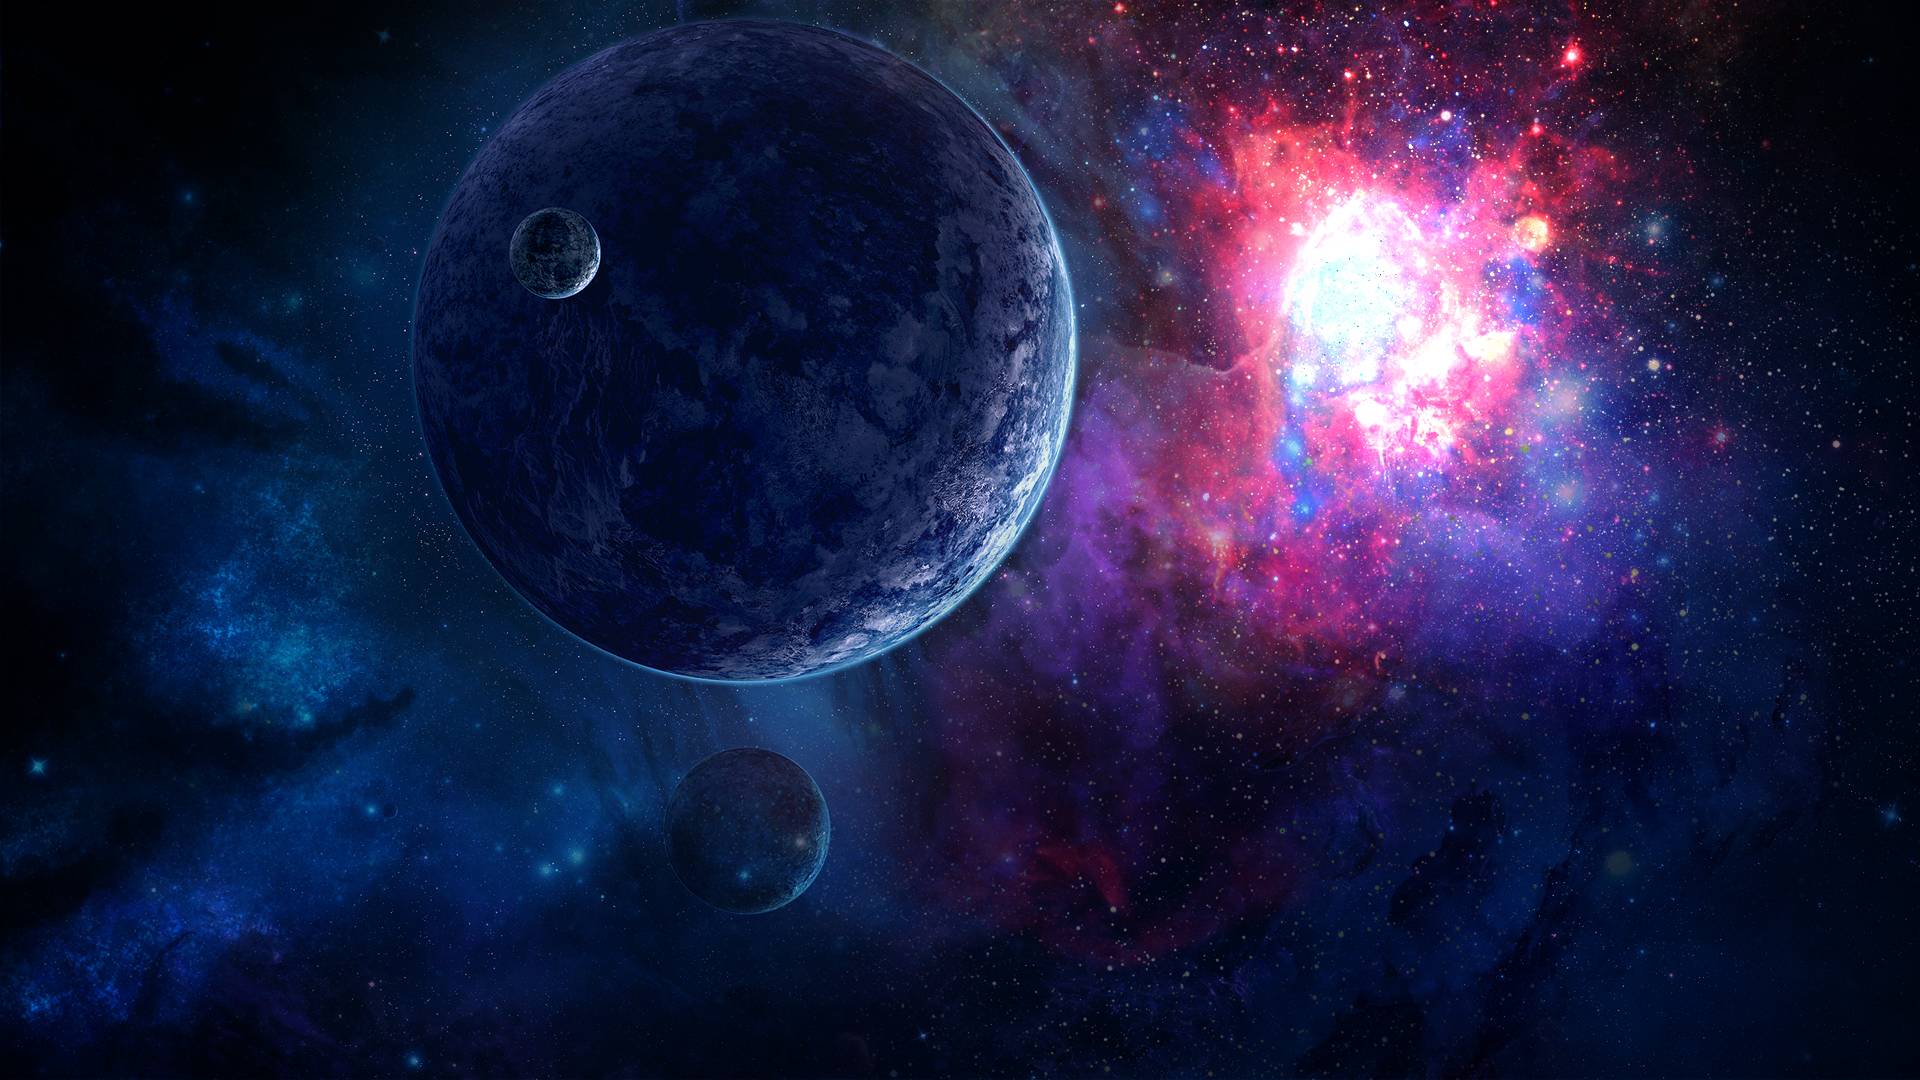 Space wallpaper 1920x1080 without lower planet